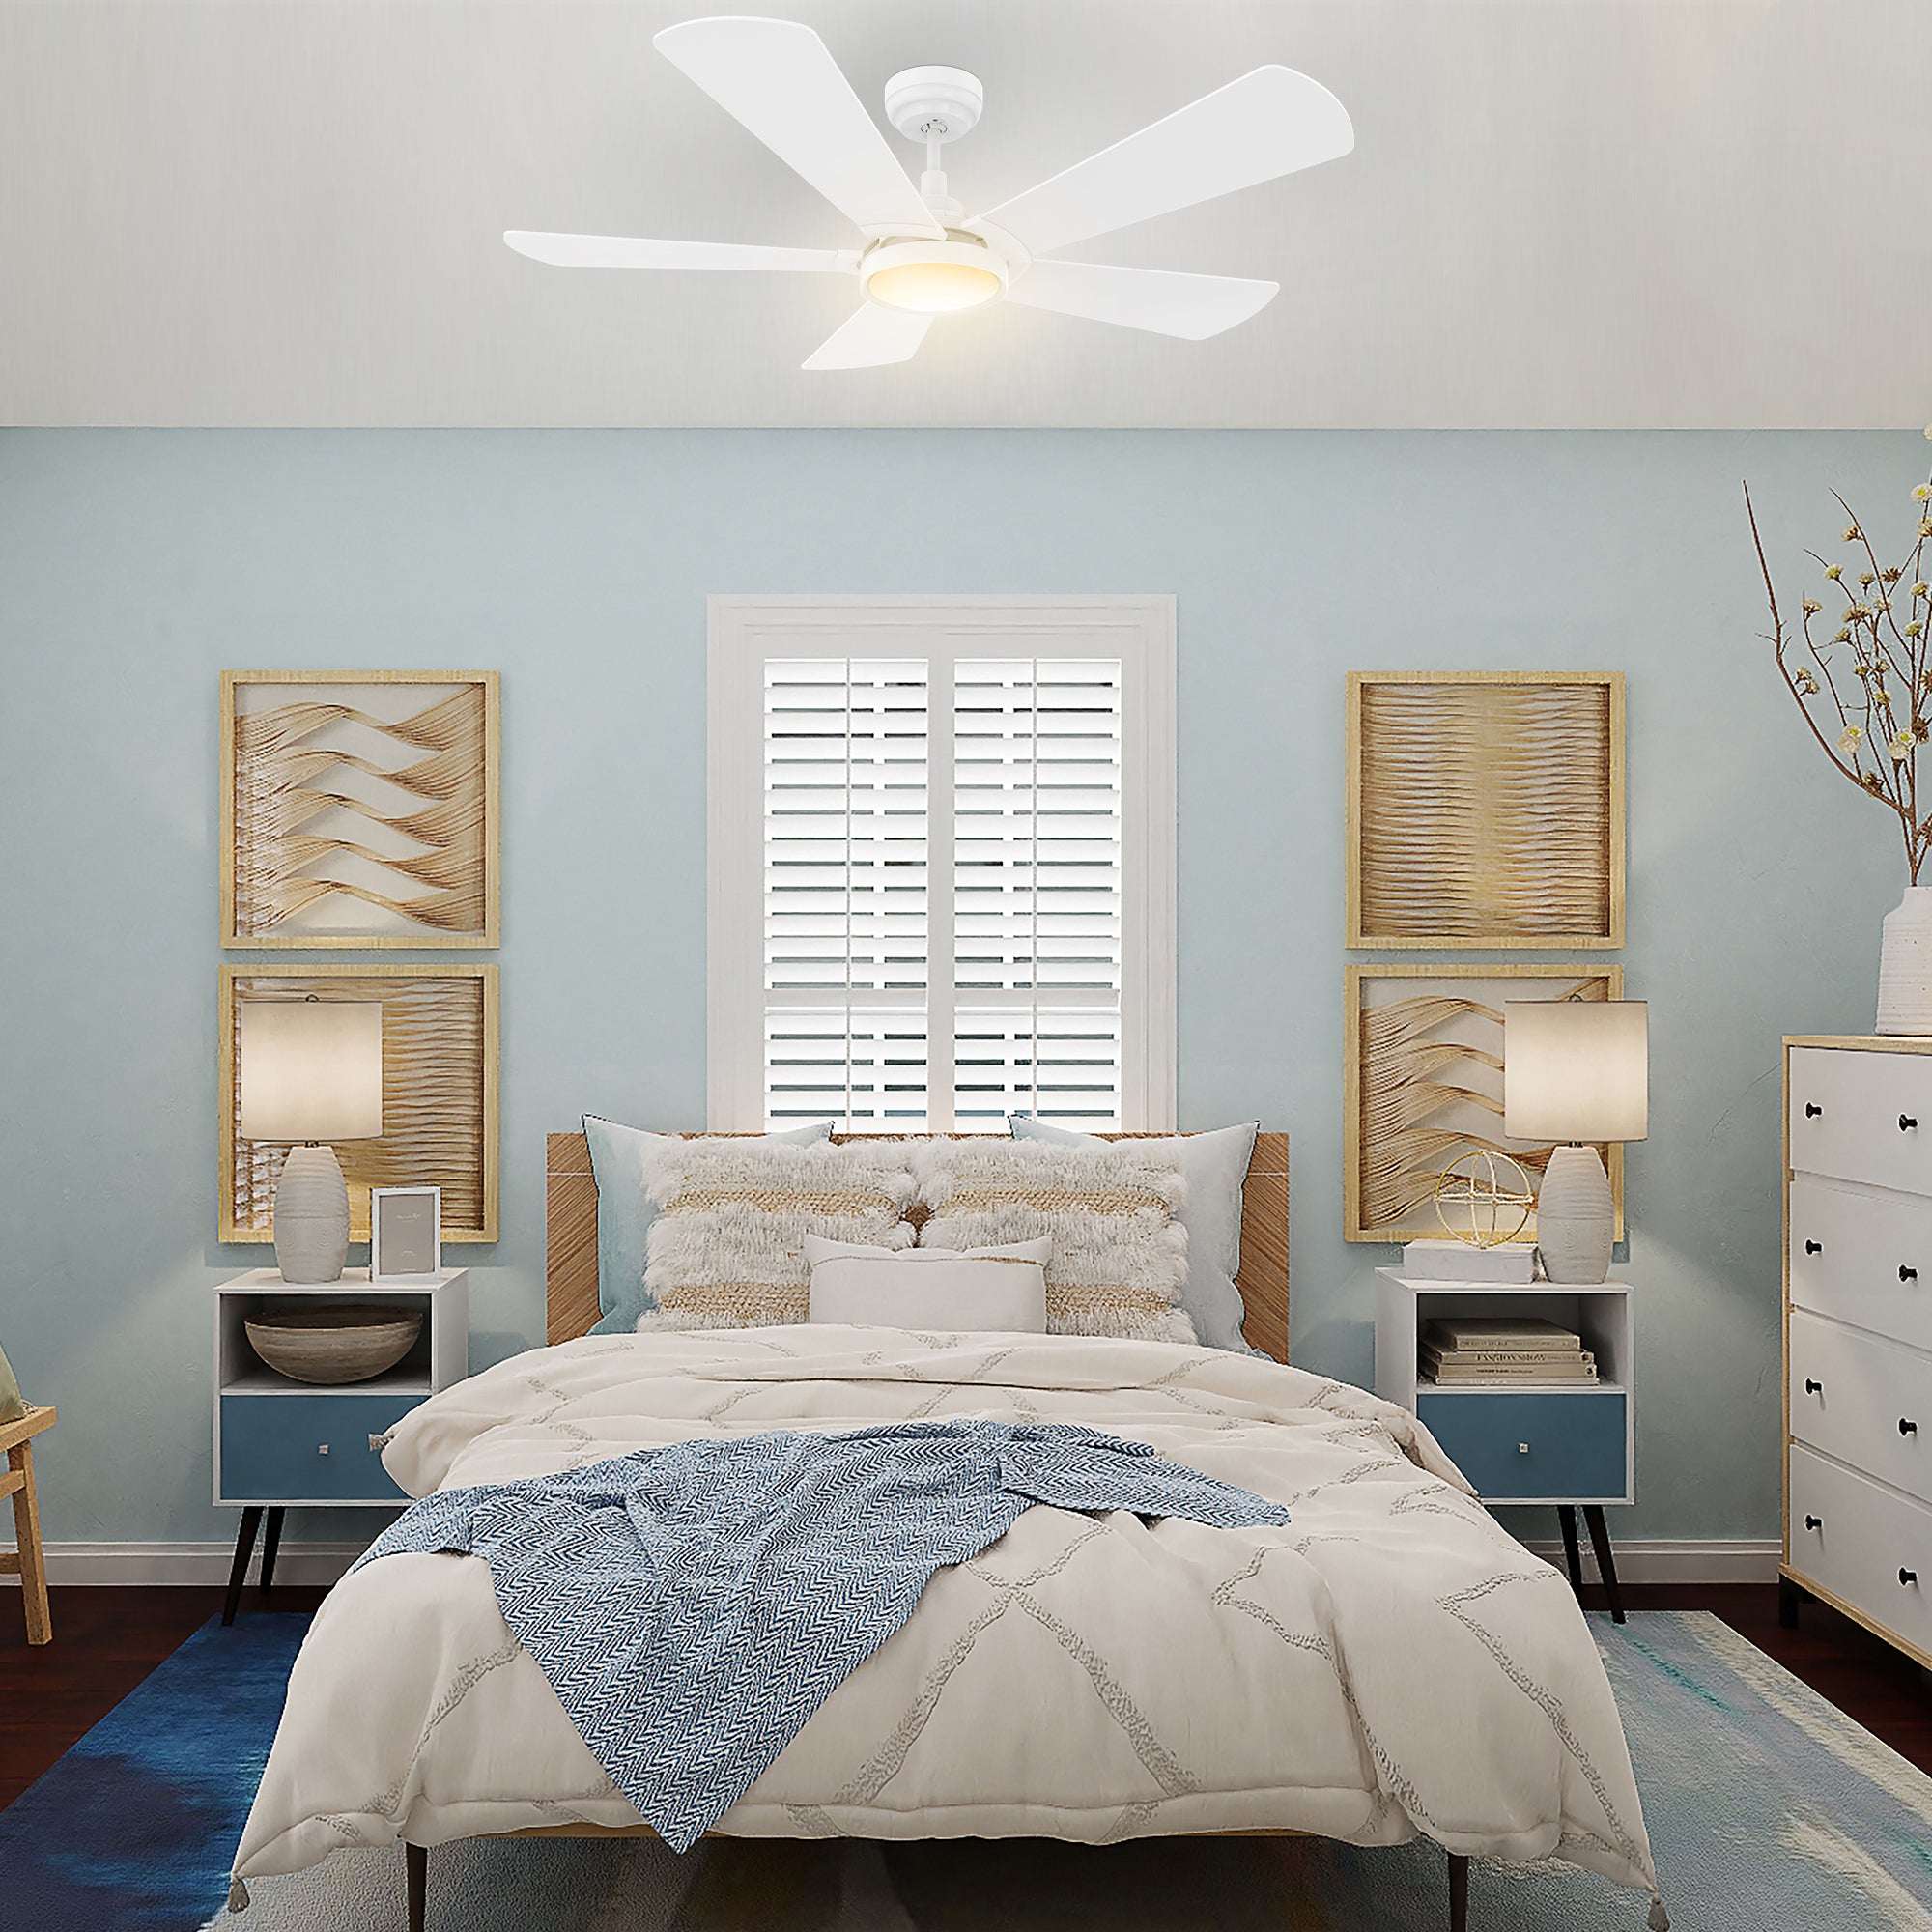 This Wilkes 52&#39;&#39; smart ceiling fan keeps your space cool, bright, and stylish. It is a soft modern masterpiece perfect for your large indoor living spaces. This Wifi smart ceiling fan is a simplicity designing with White finish, use elegant Plywood blades, Glass shade and has an integrated 4000K LED cool light. The fan features Remote control, Wi-Fi apps, Siri Shortcut and Voice control technology (compatible with Amazon Alexa and Google Home Assistant ) to set fan preferences.